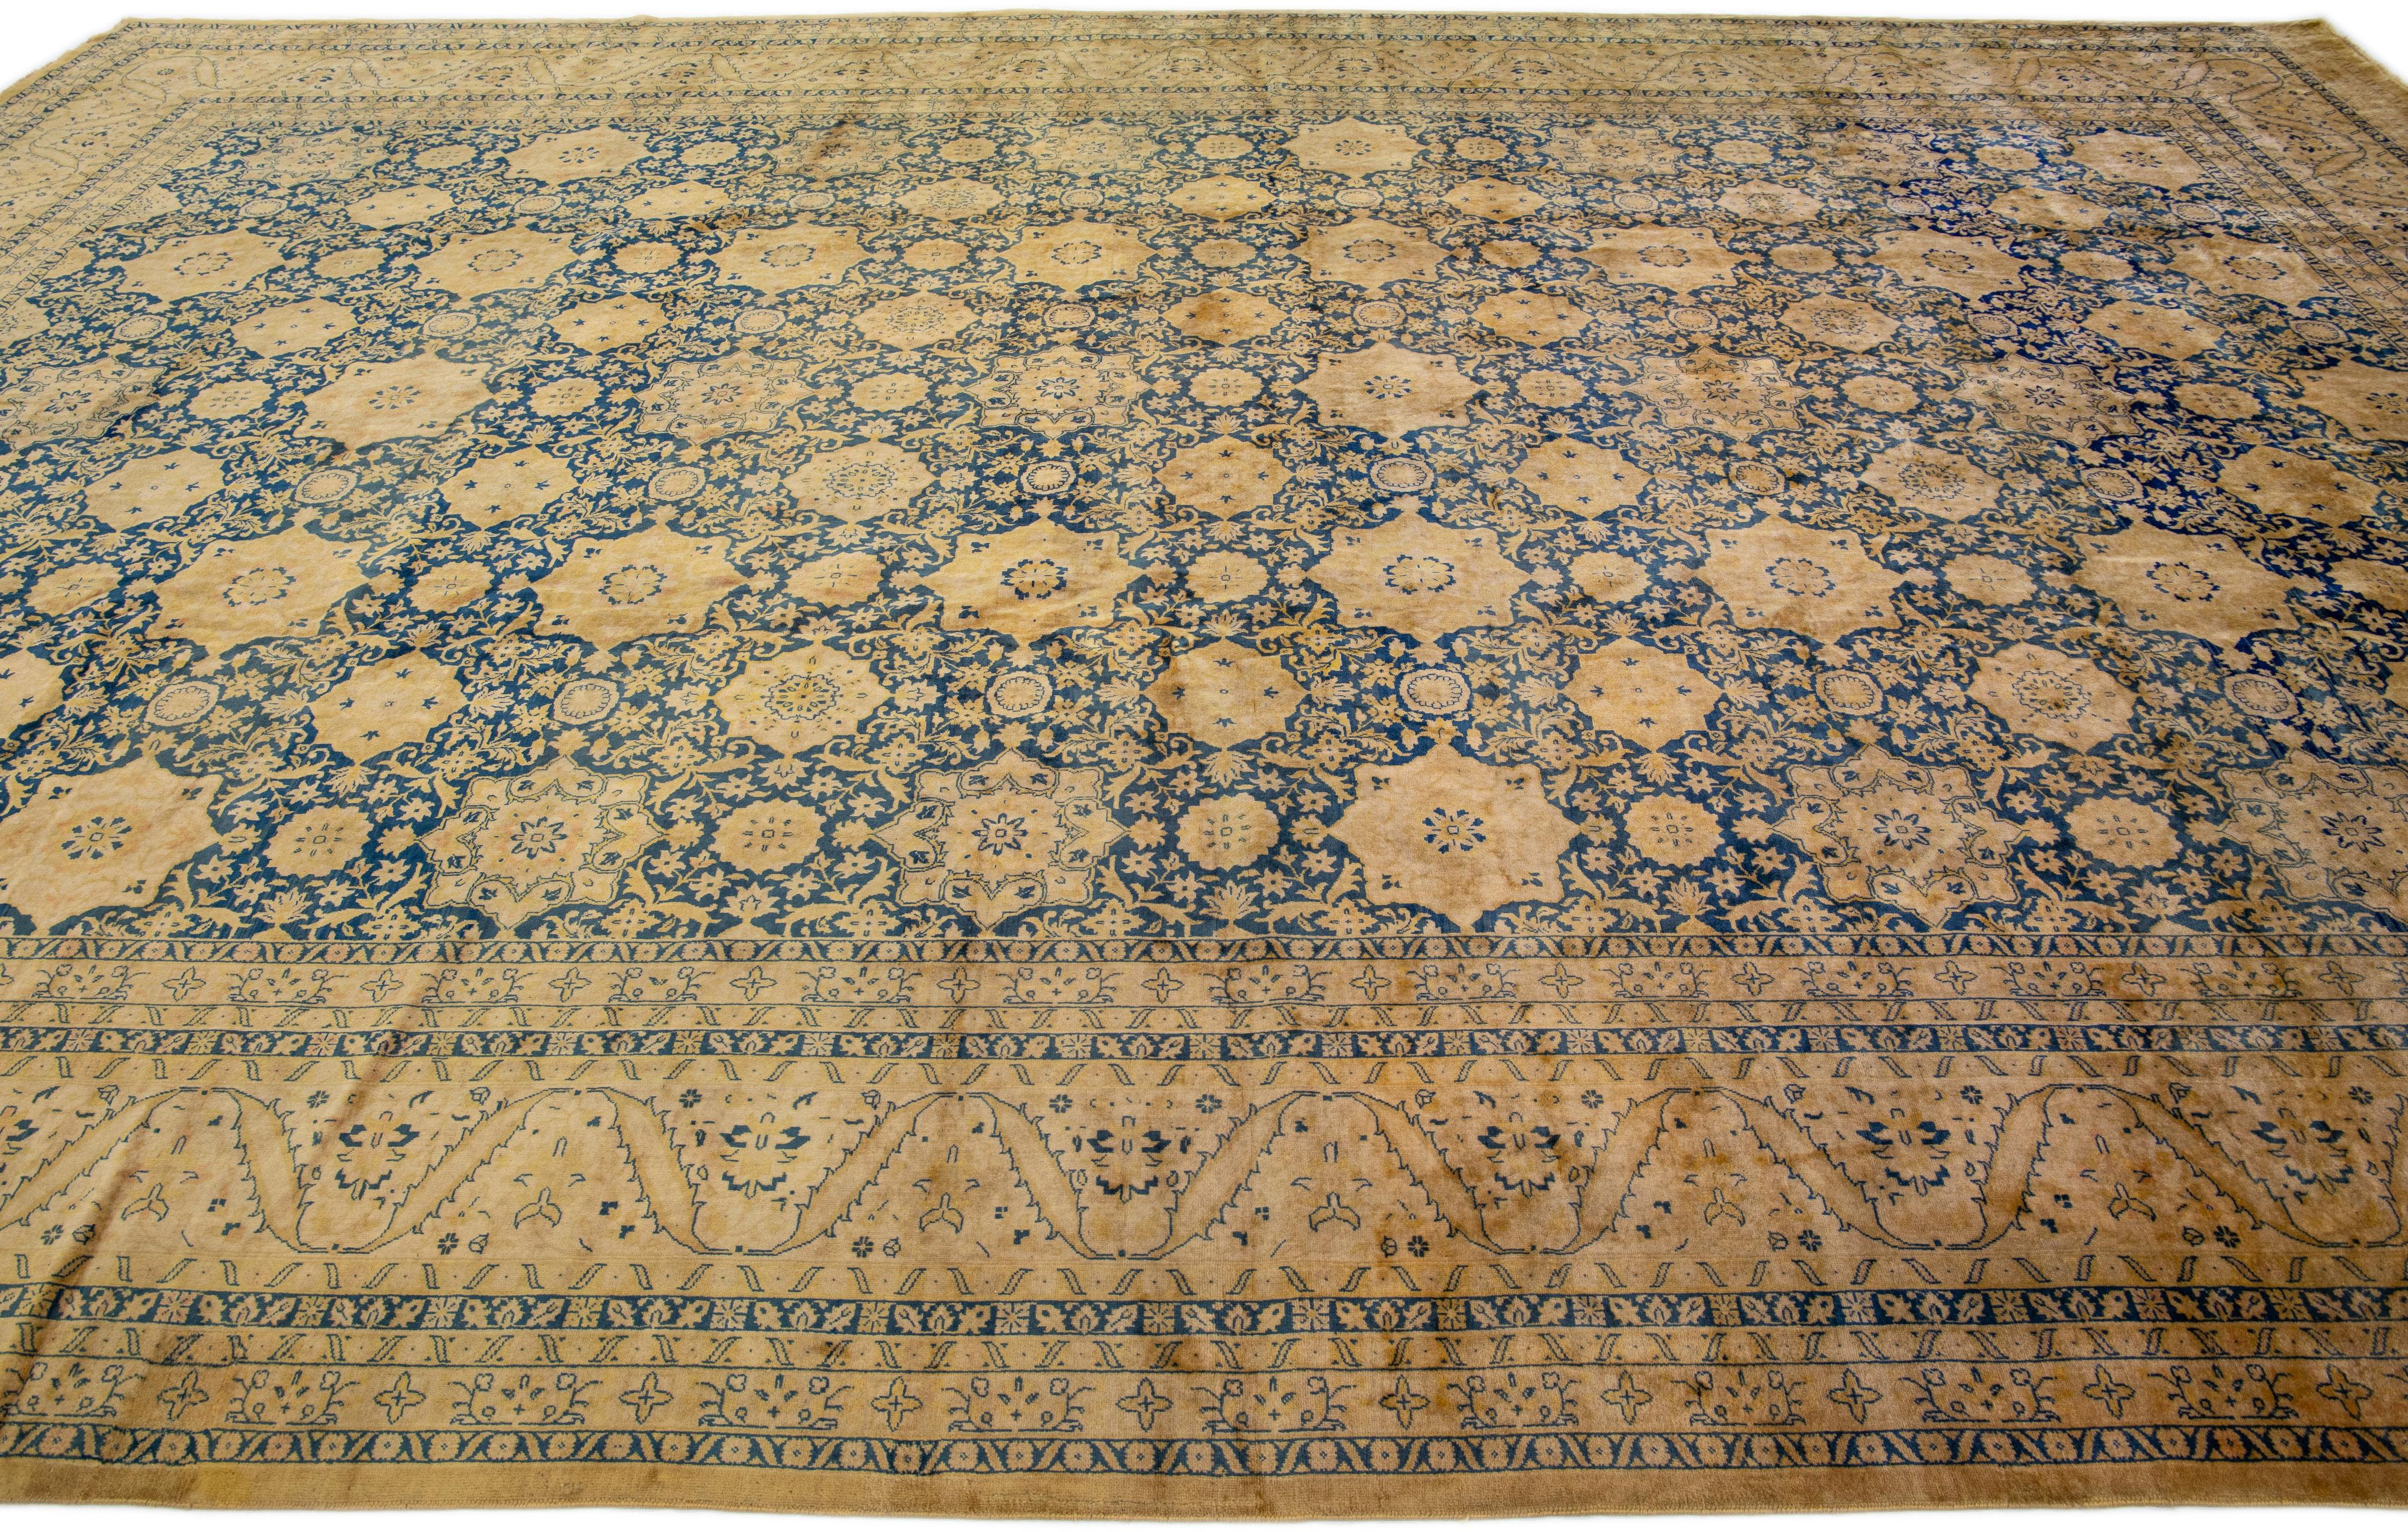 Antique Indian Handmade Blue Wool Rug with Allover Rosette Design In Good Condition For Sale In Norwalk, CT